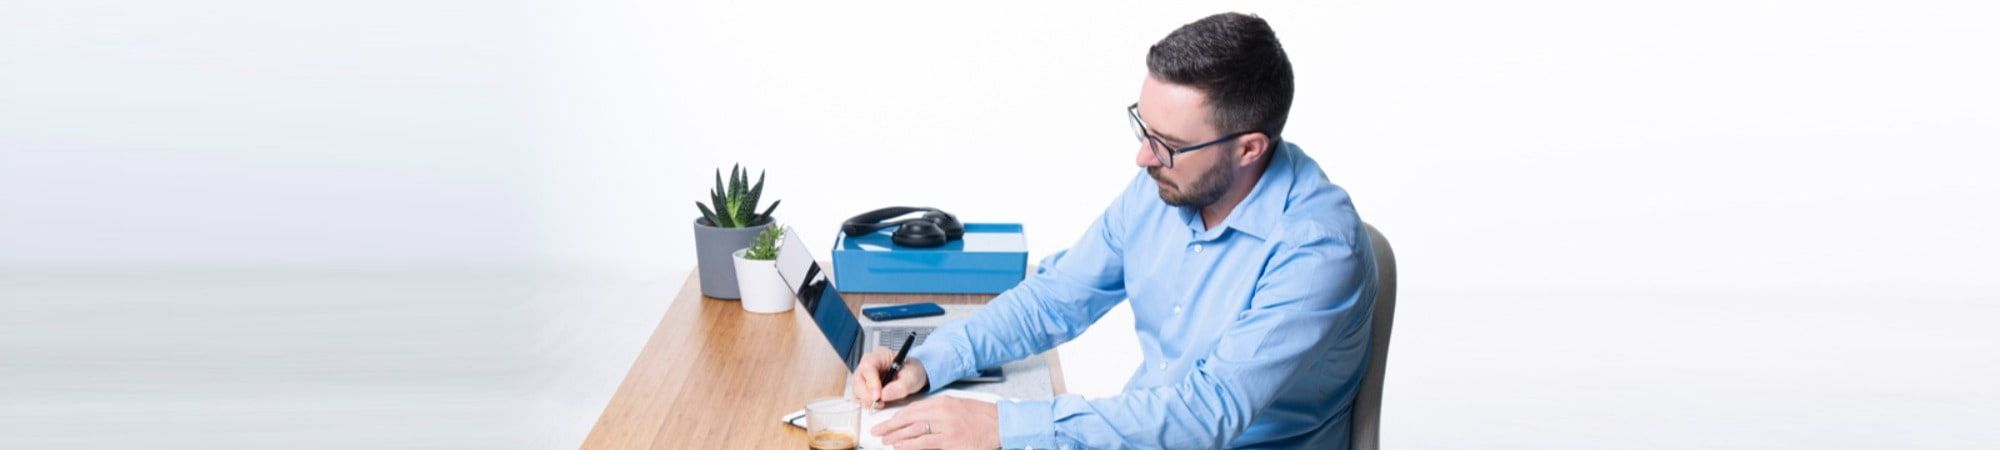 Recruitment consultant at a desk using a laptop or writing